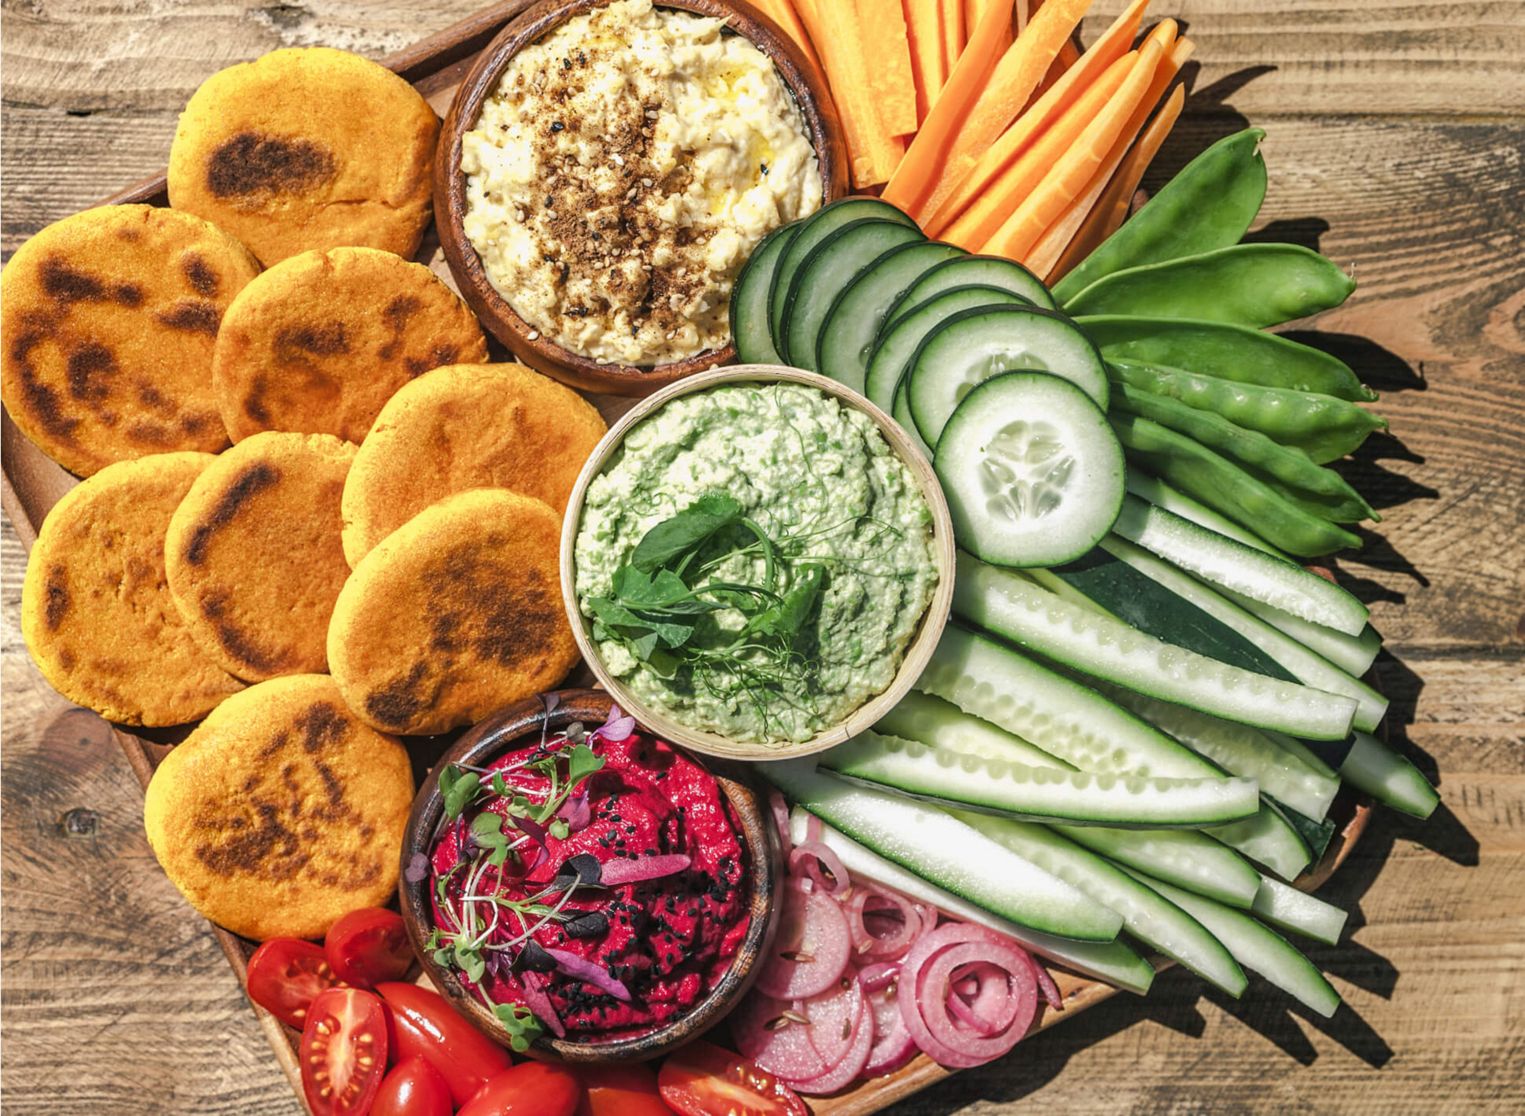 A vegan charcuterie board filled with different hummus dips, vegetables and breads.